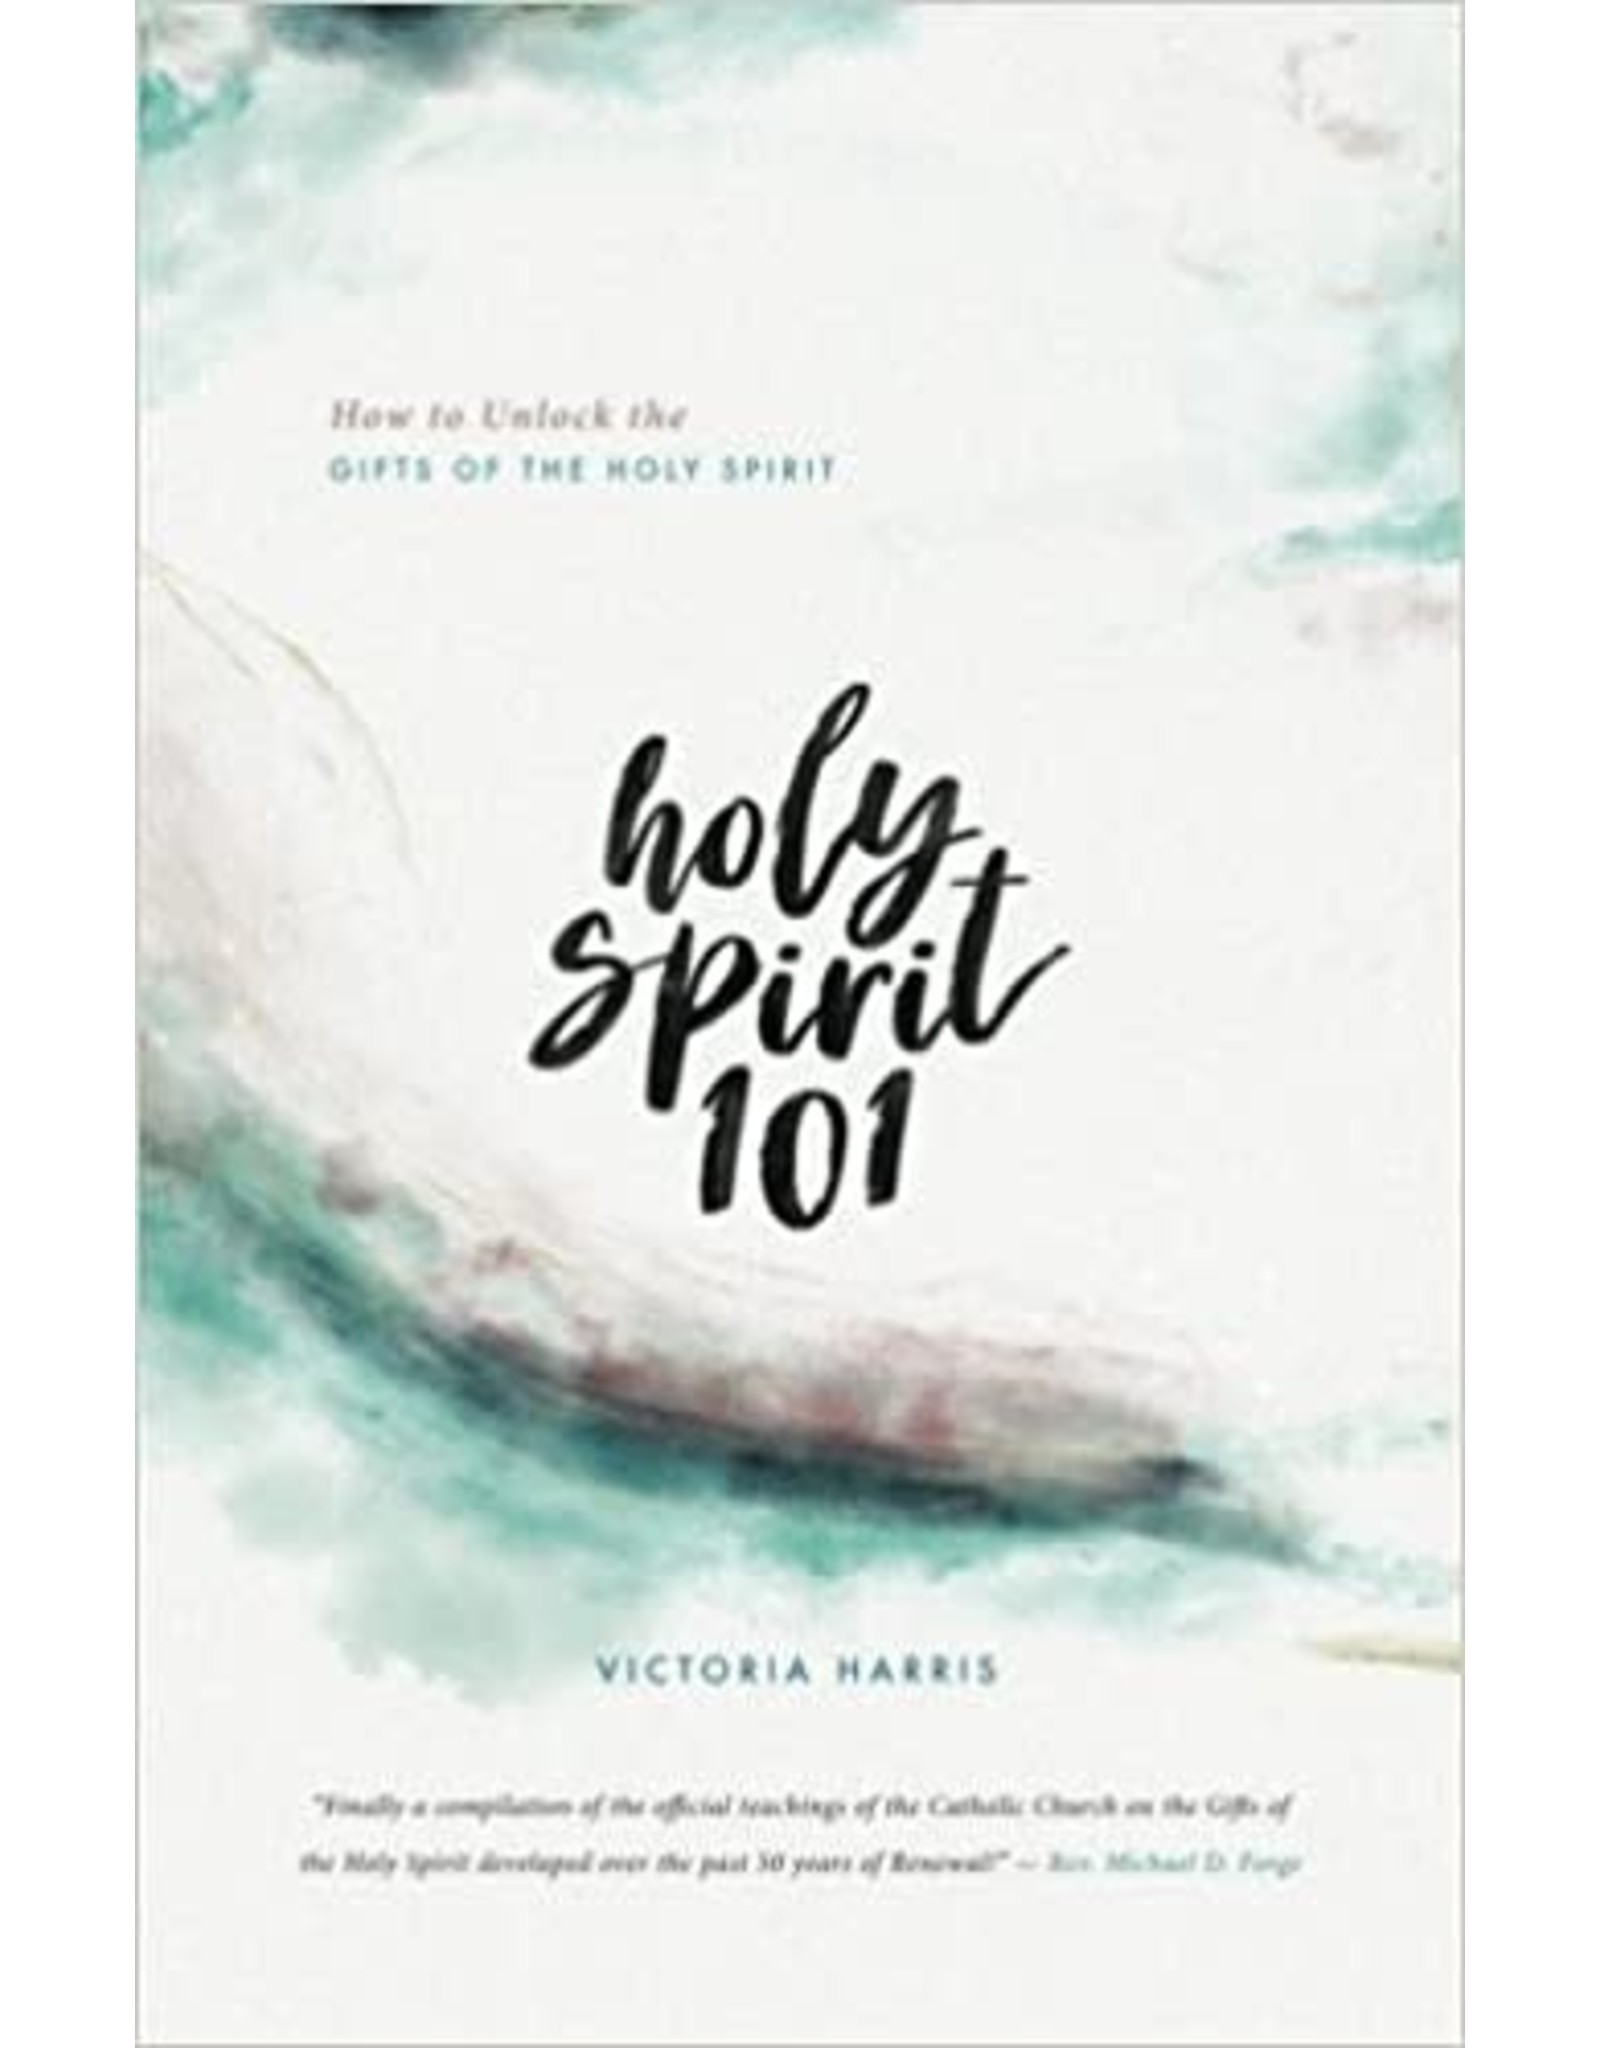 Arise Worship Ministry Holy Spirit 101: Unlock the Gifts of the Holy Spirit by Victoria Harris